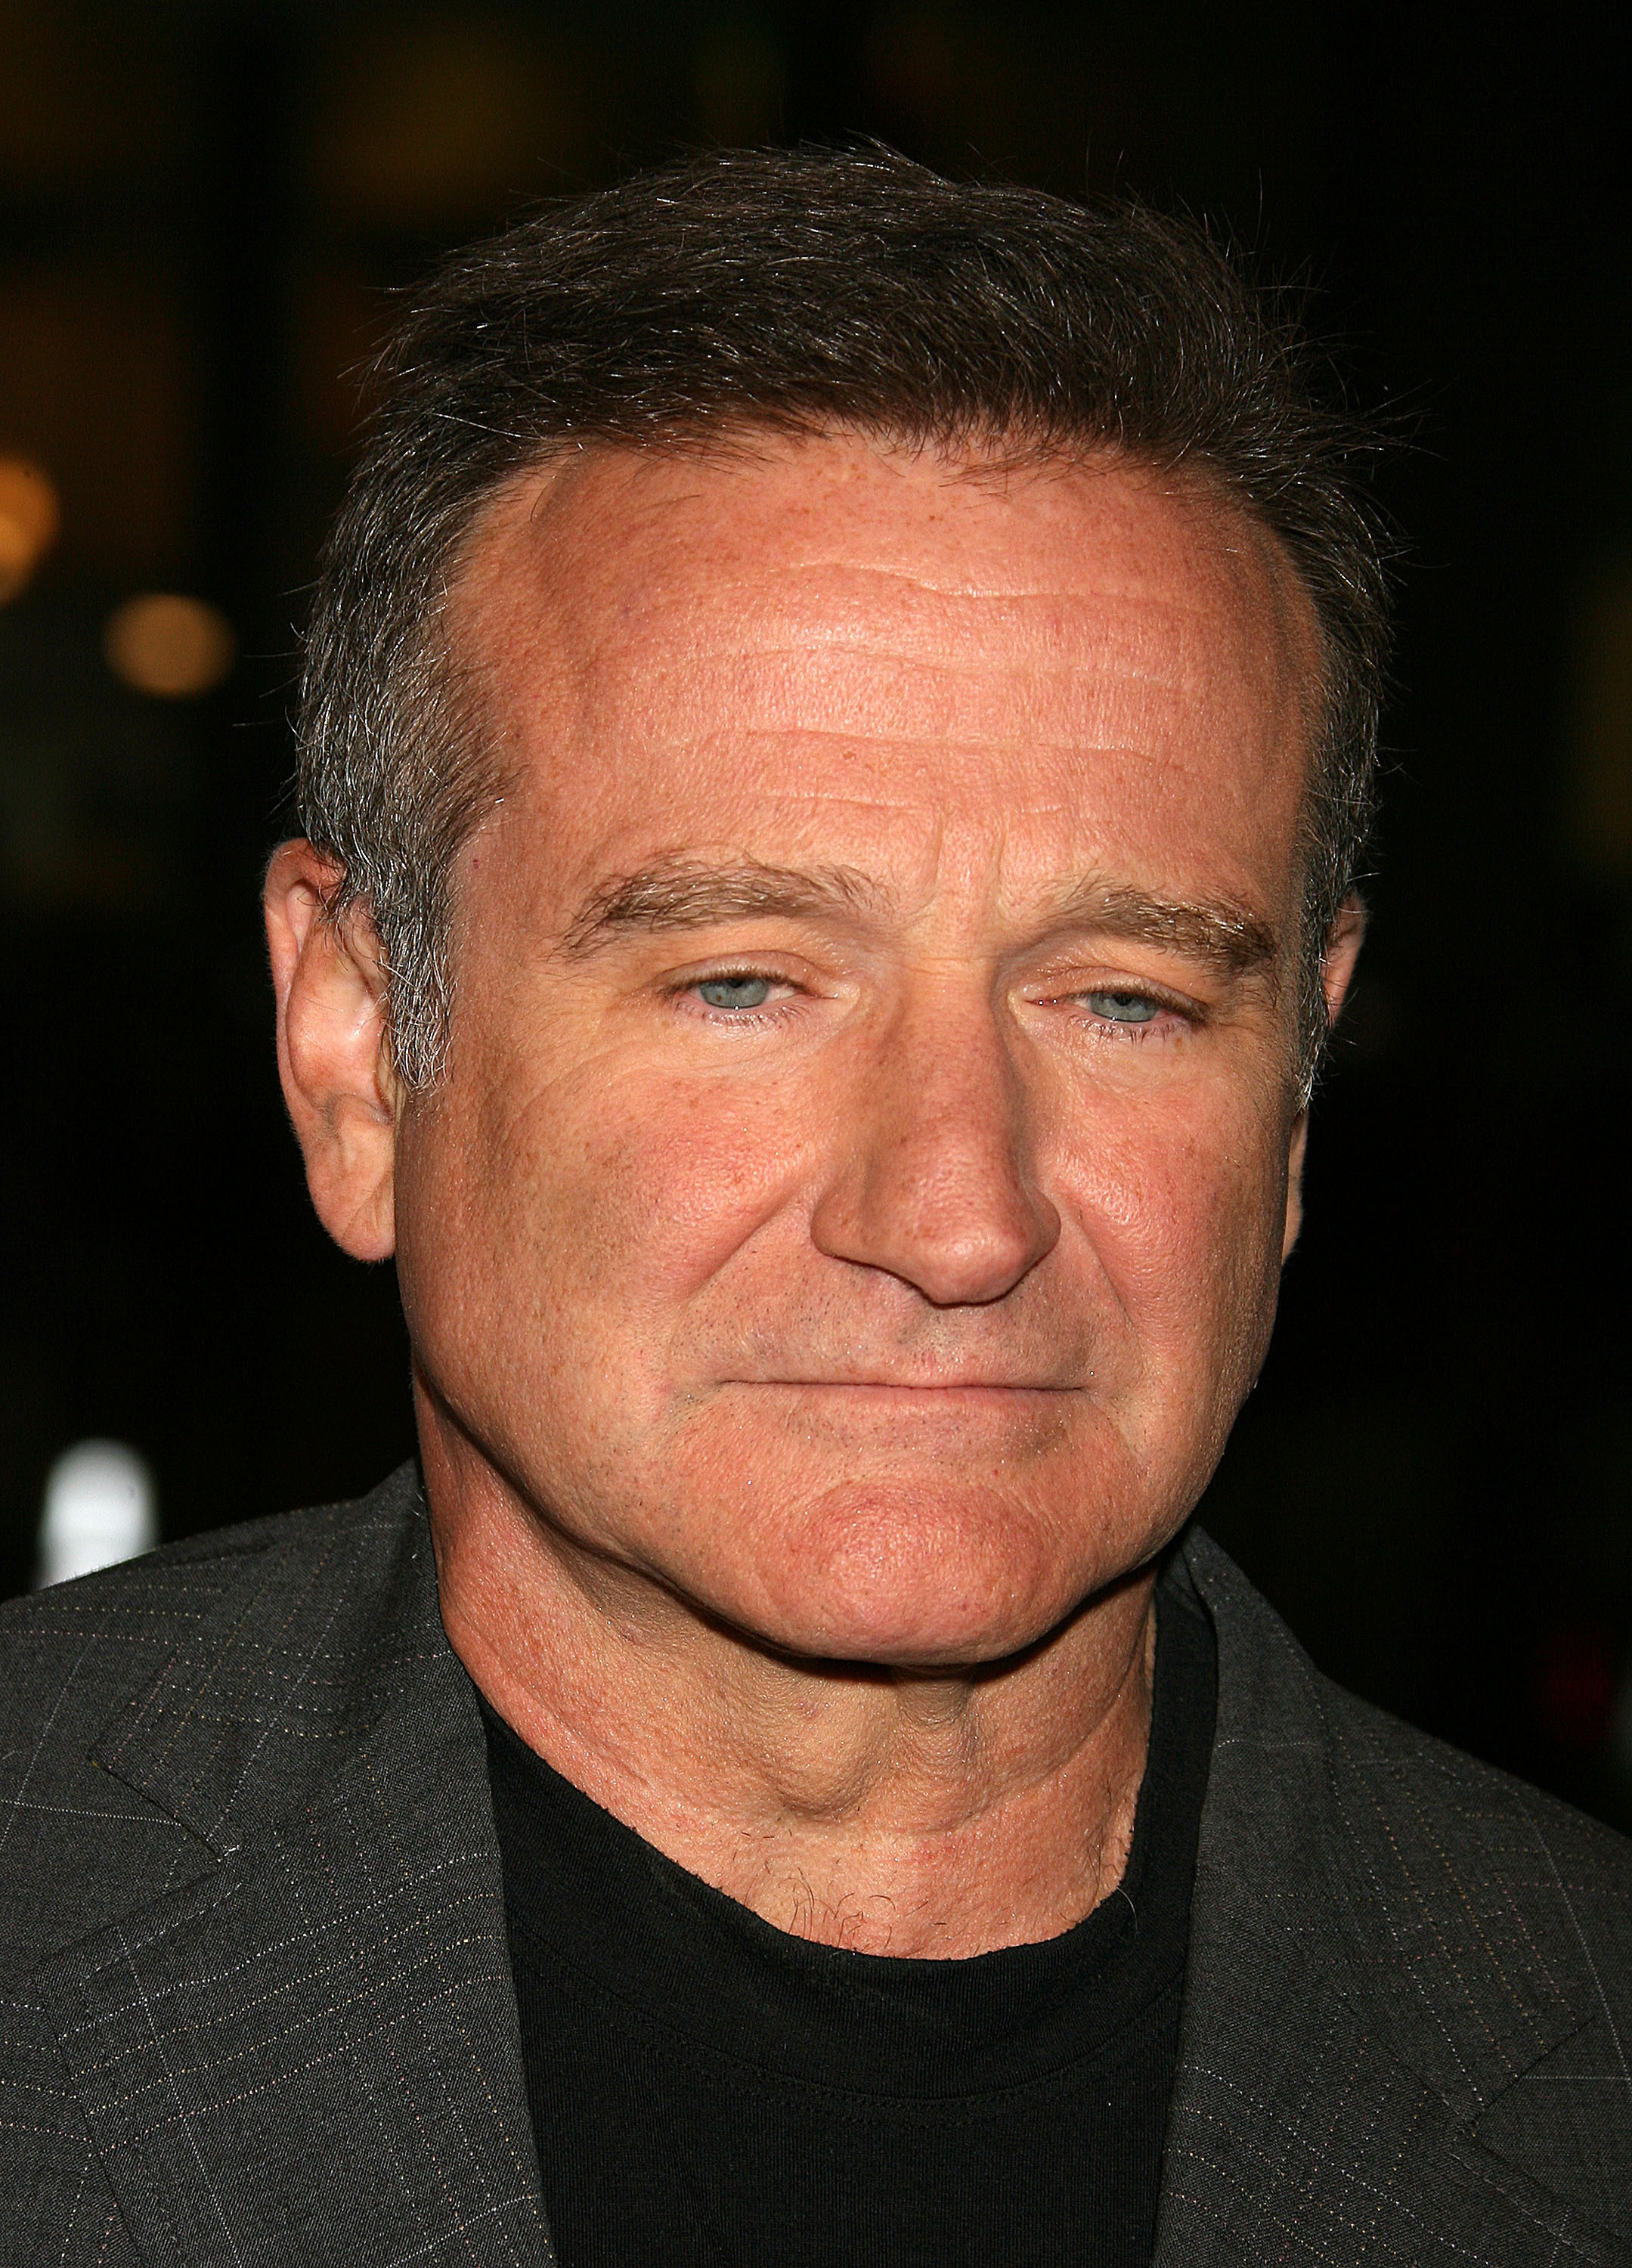 Robin Williams in Los Angeles in 2006 | Source: Getty Images